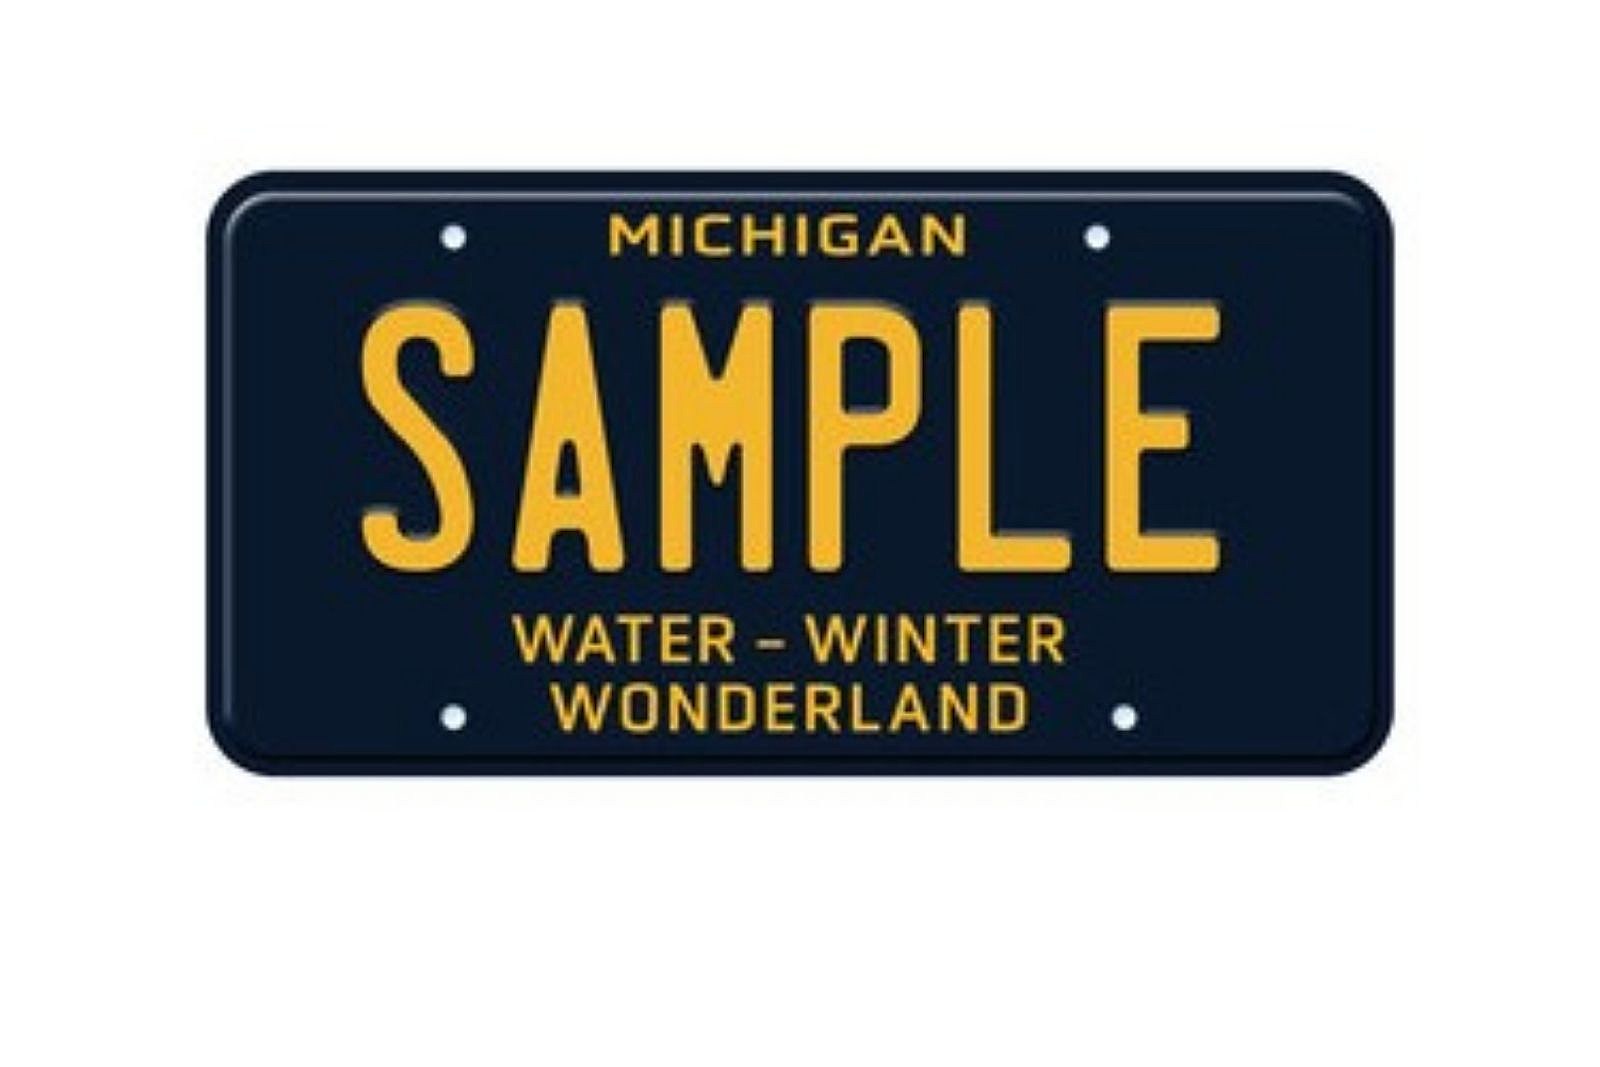 Seeing More of These MI License Plates? Here's How to Get One